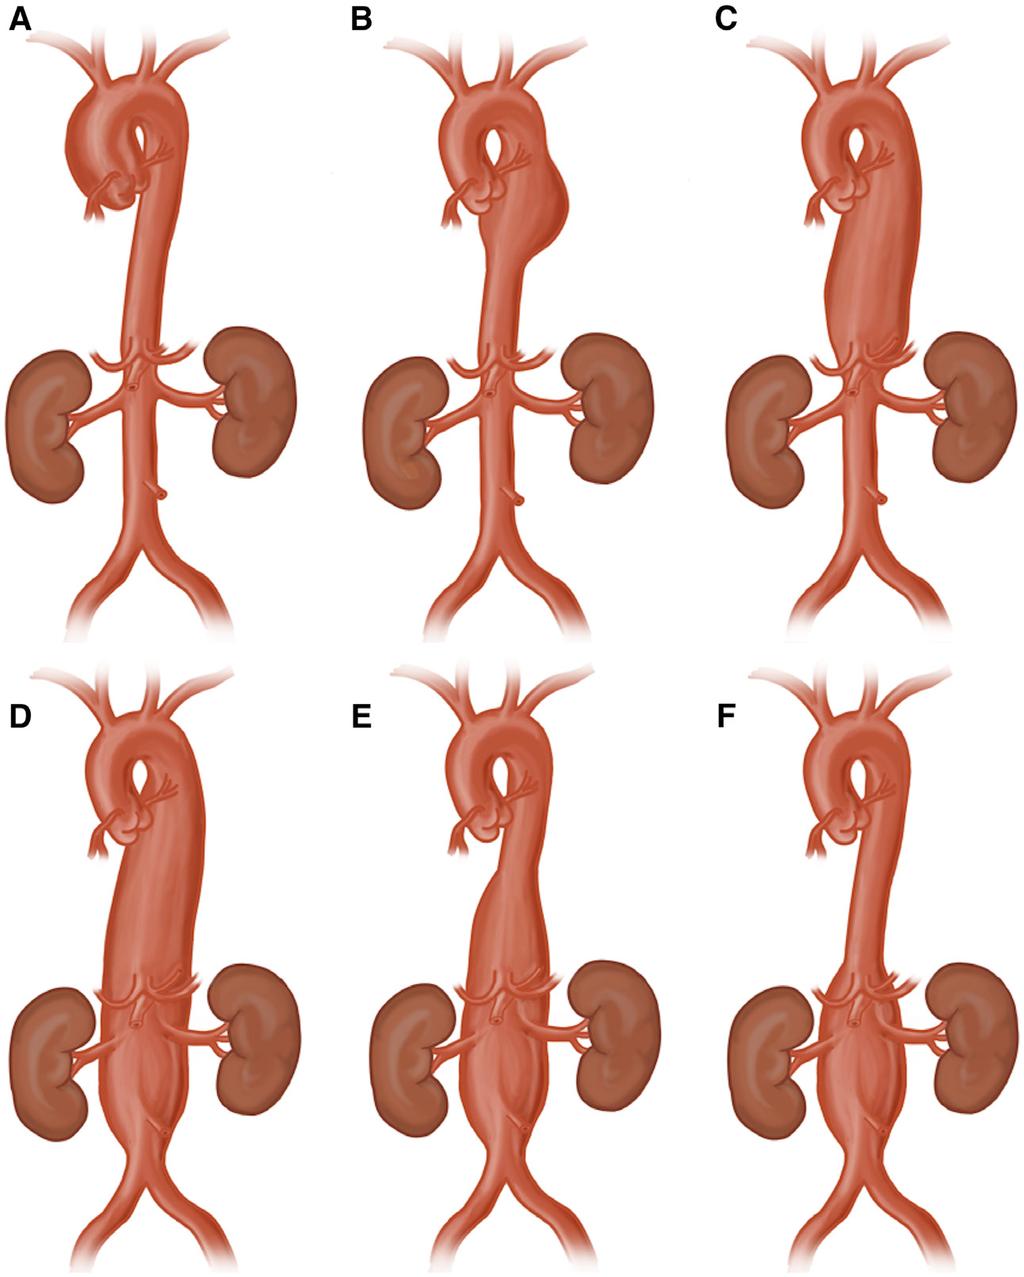 654 Circulation Research February 15, 2019 Figure 4. Anatomic classification of thoracic aortic aneurysms (TAA) and Crawford classification of thoracoabdominal (TAAA) aortic aneurysms.